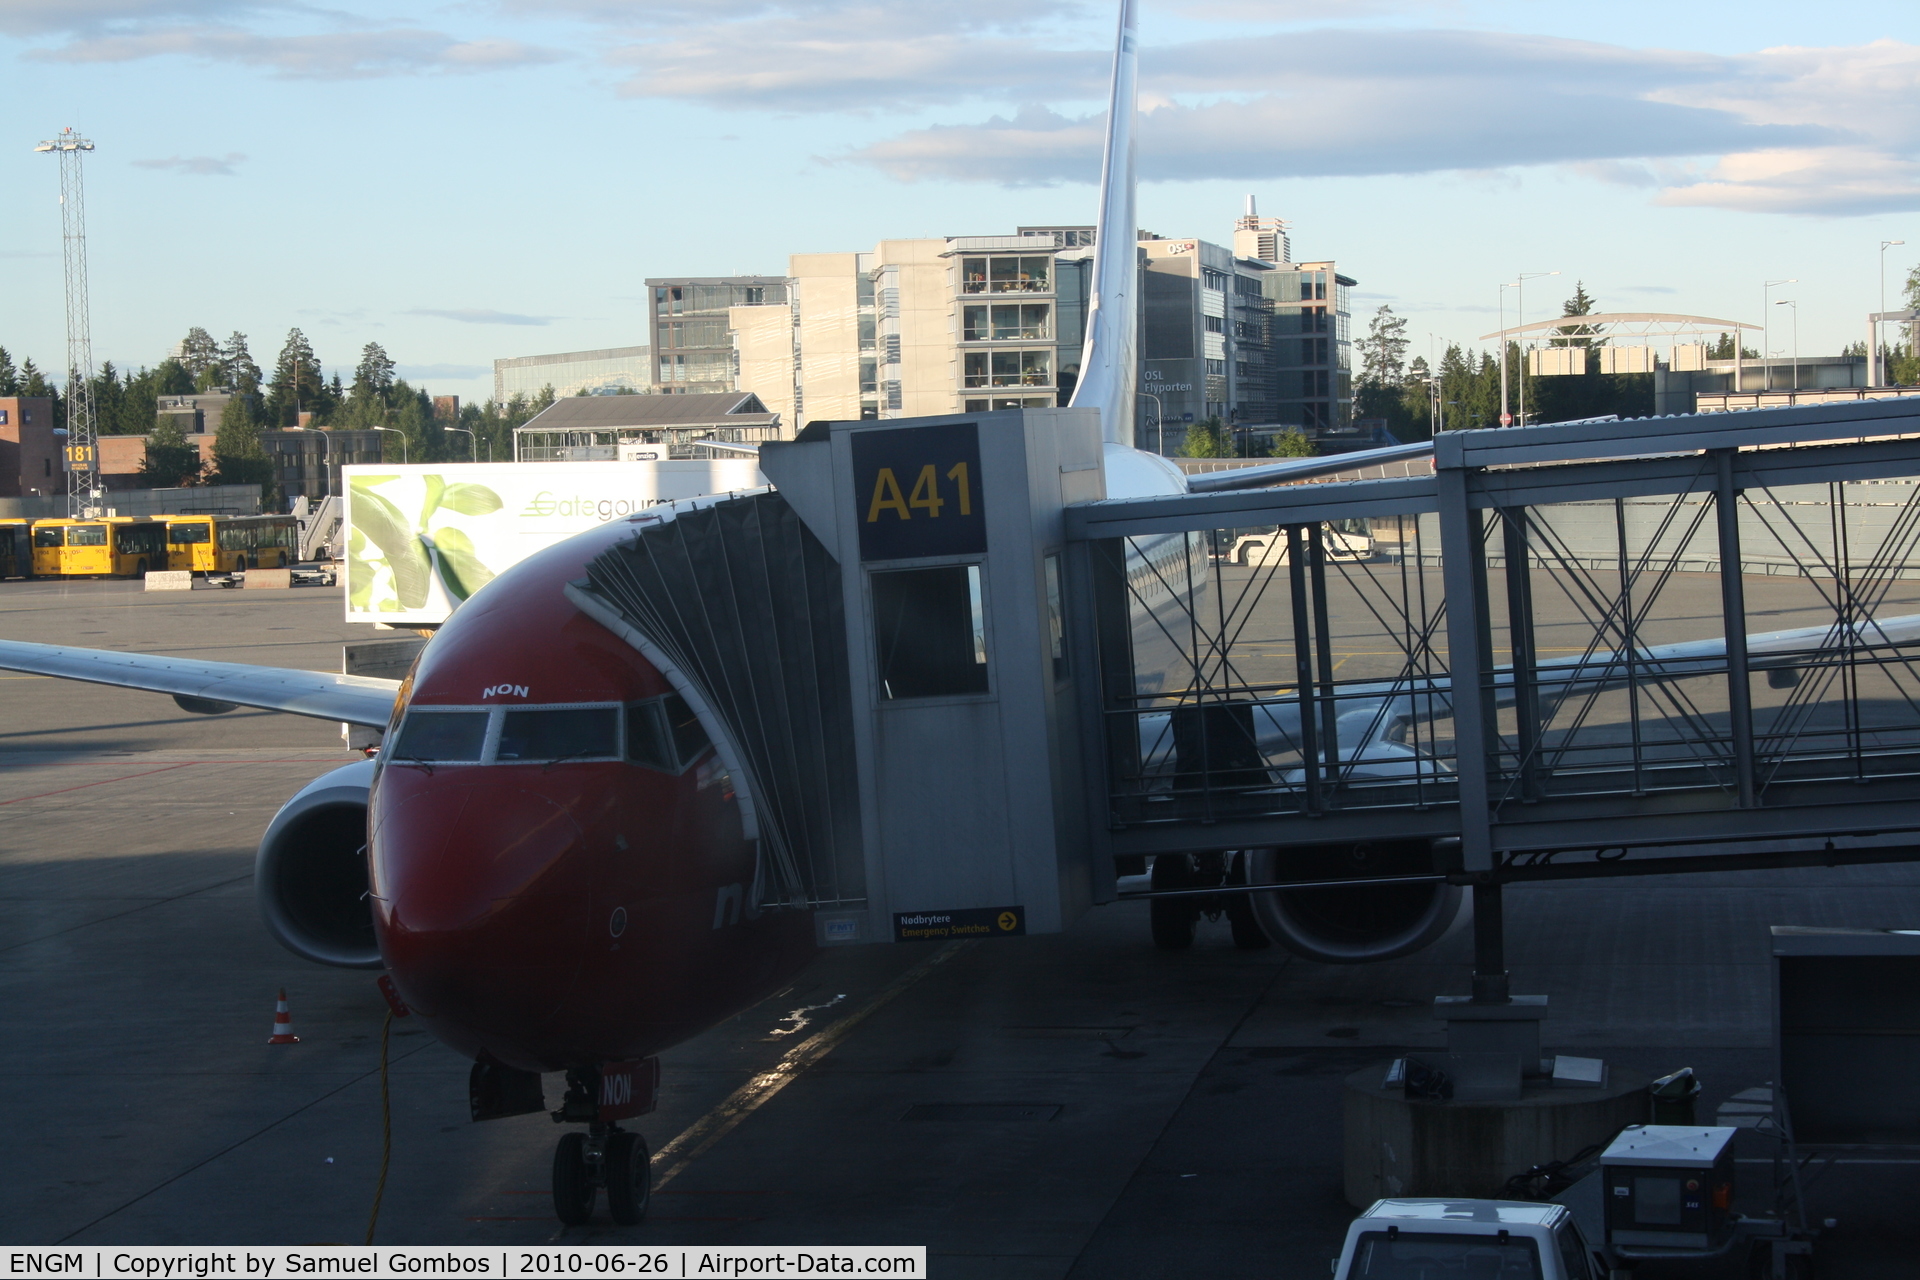 Oslo Airport, Gardermoen, Gardermoen (near Oslo), Akershus Norway (ENGM) - norwegian.com to Budapest (BUD) from Oslo-Gardermoen (OSL) on Gate A41....Boeing 737-800 with Winglets and the Swedish Astronom: Anders Celcius on the tail.....Welcome onbord to Norwegian flight DY1552 to Budapest (BUD)!^^:D